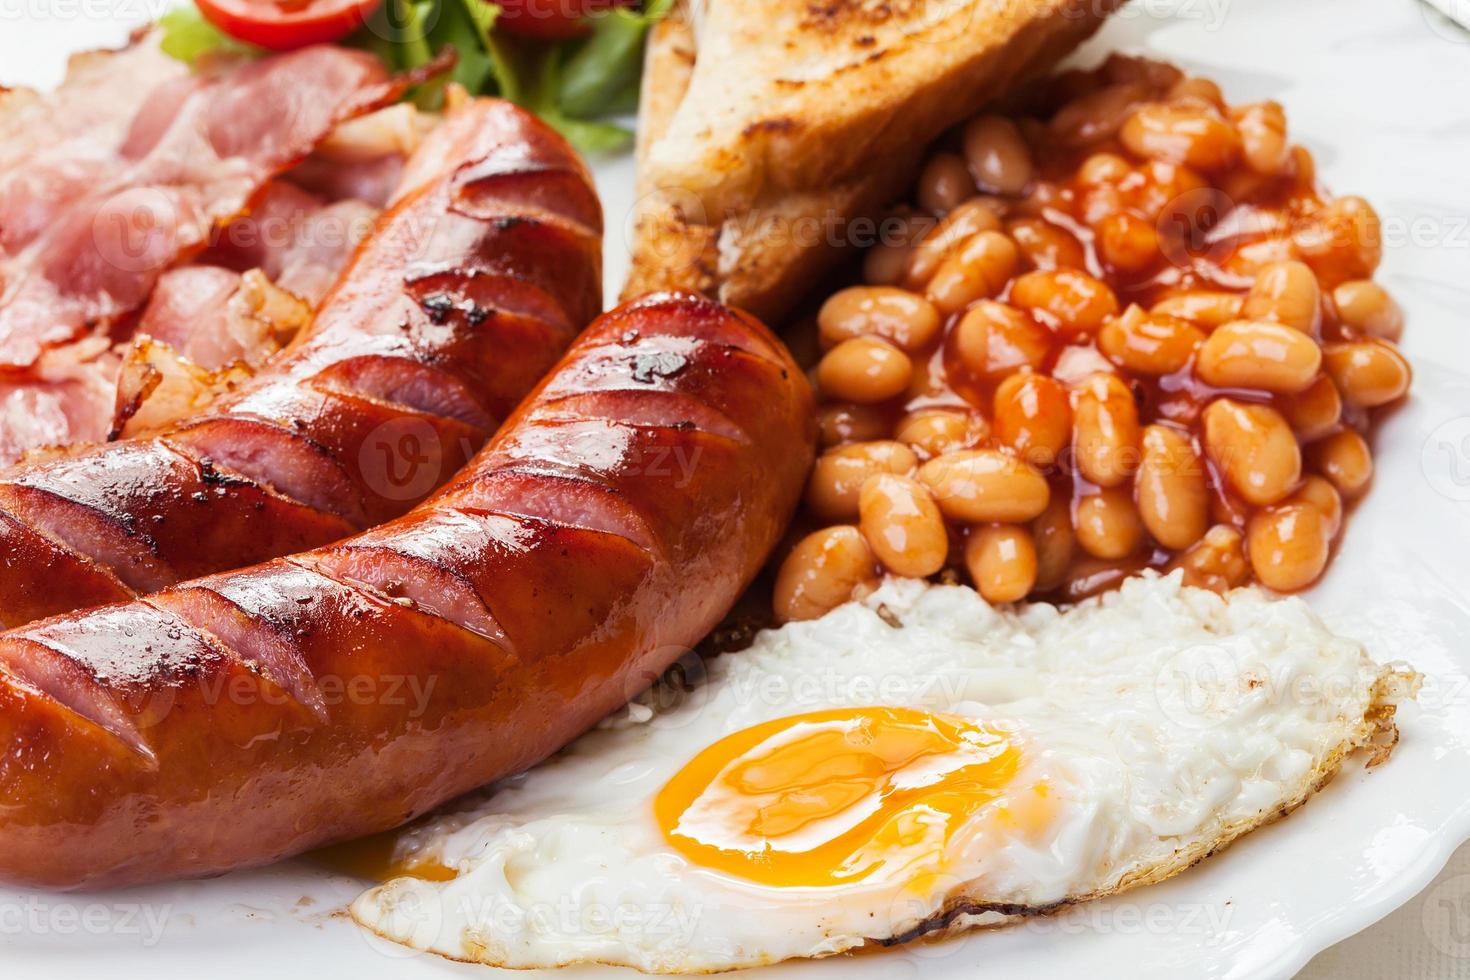 Full English breakfast with bacon, sausage, egg and baked beans photo